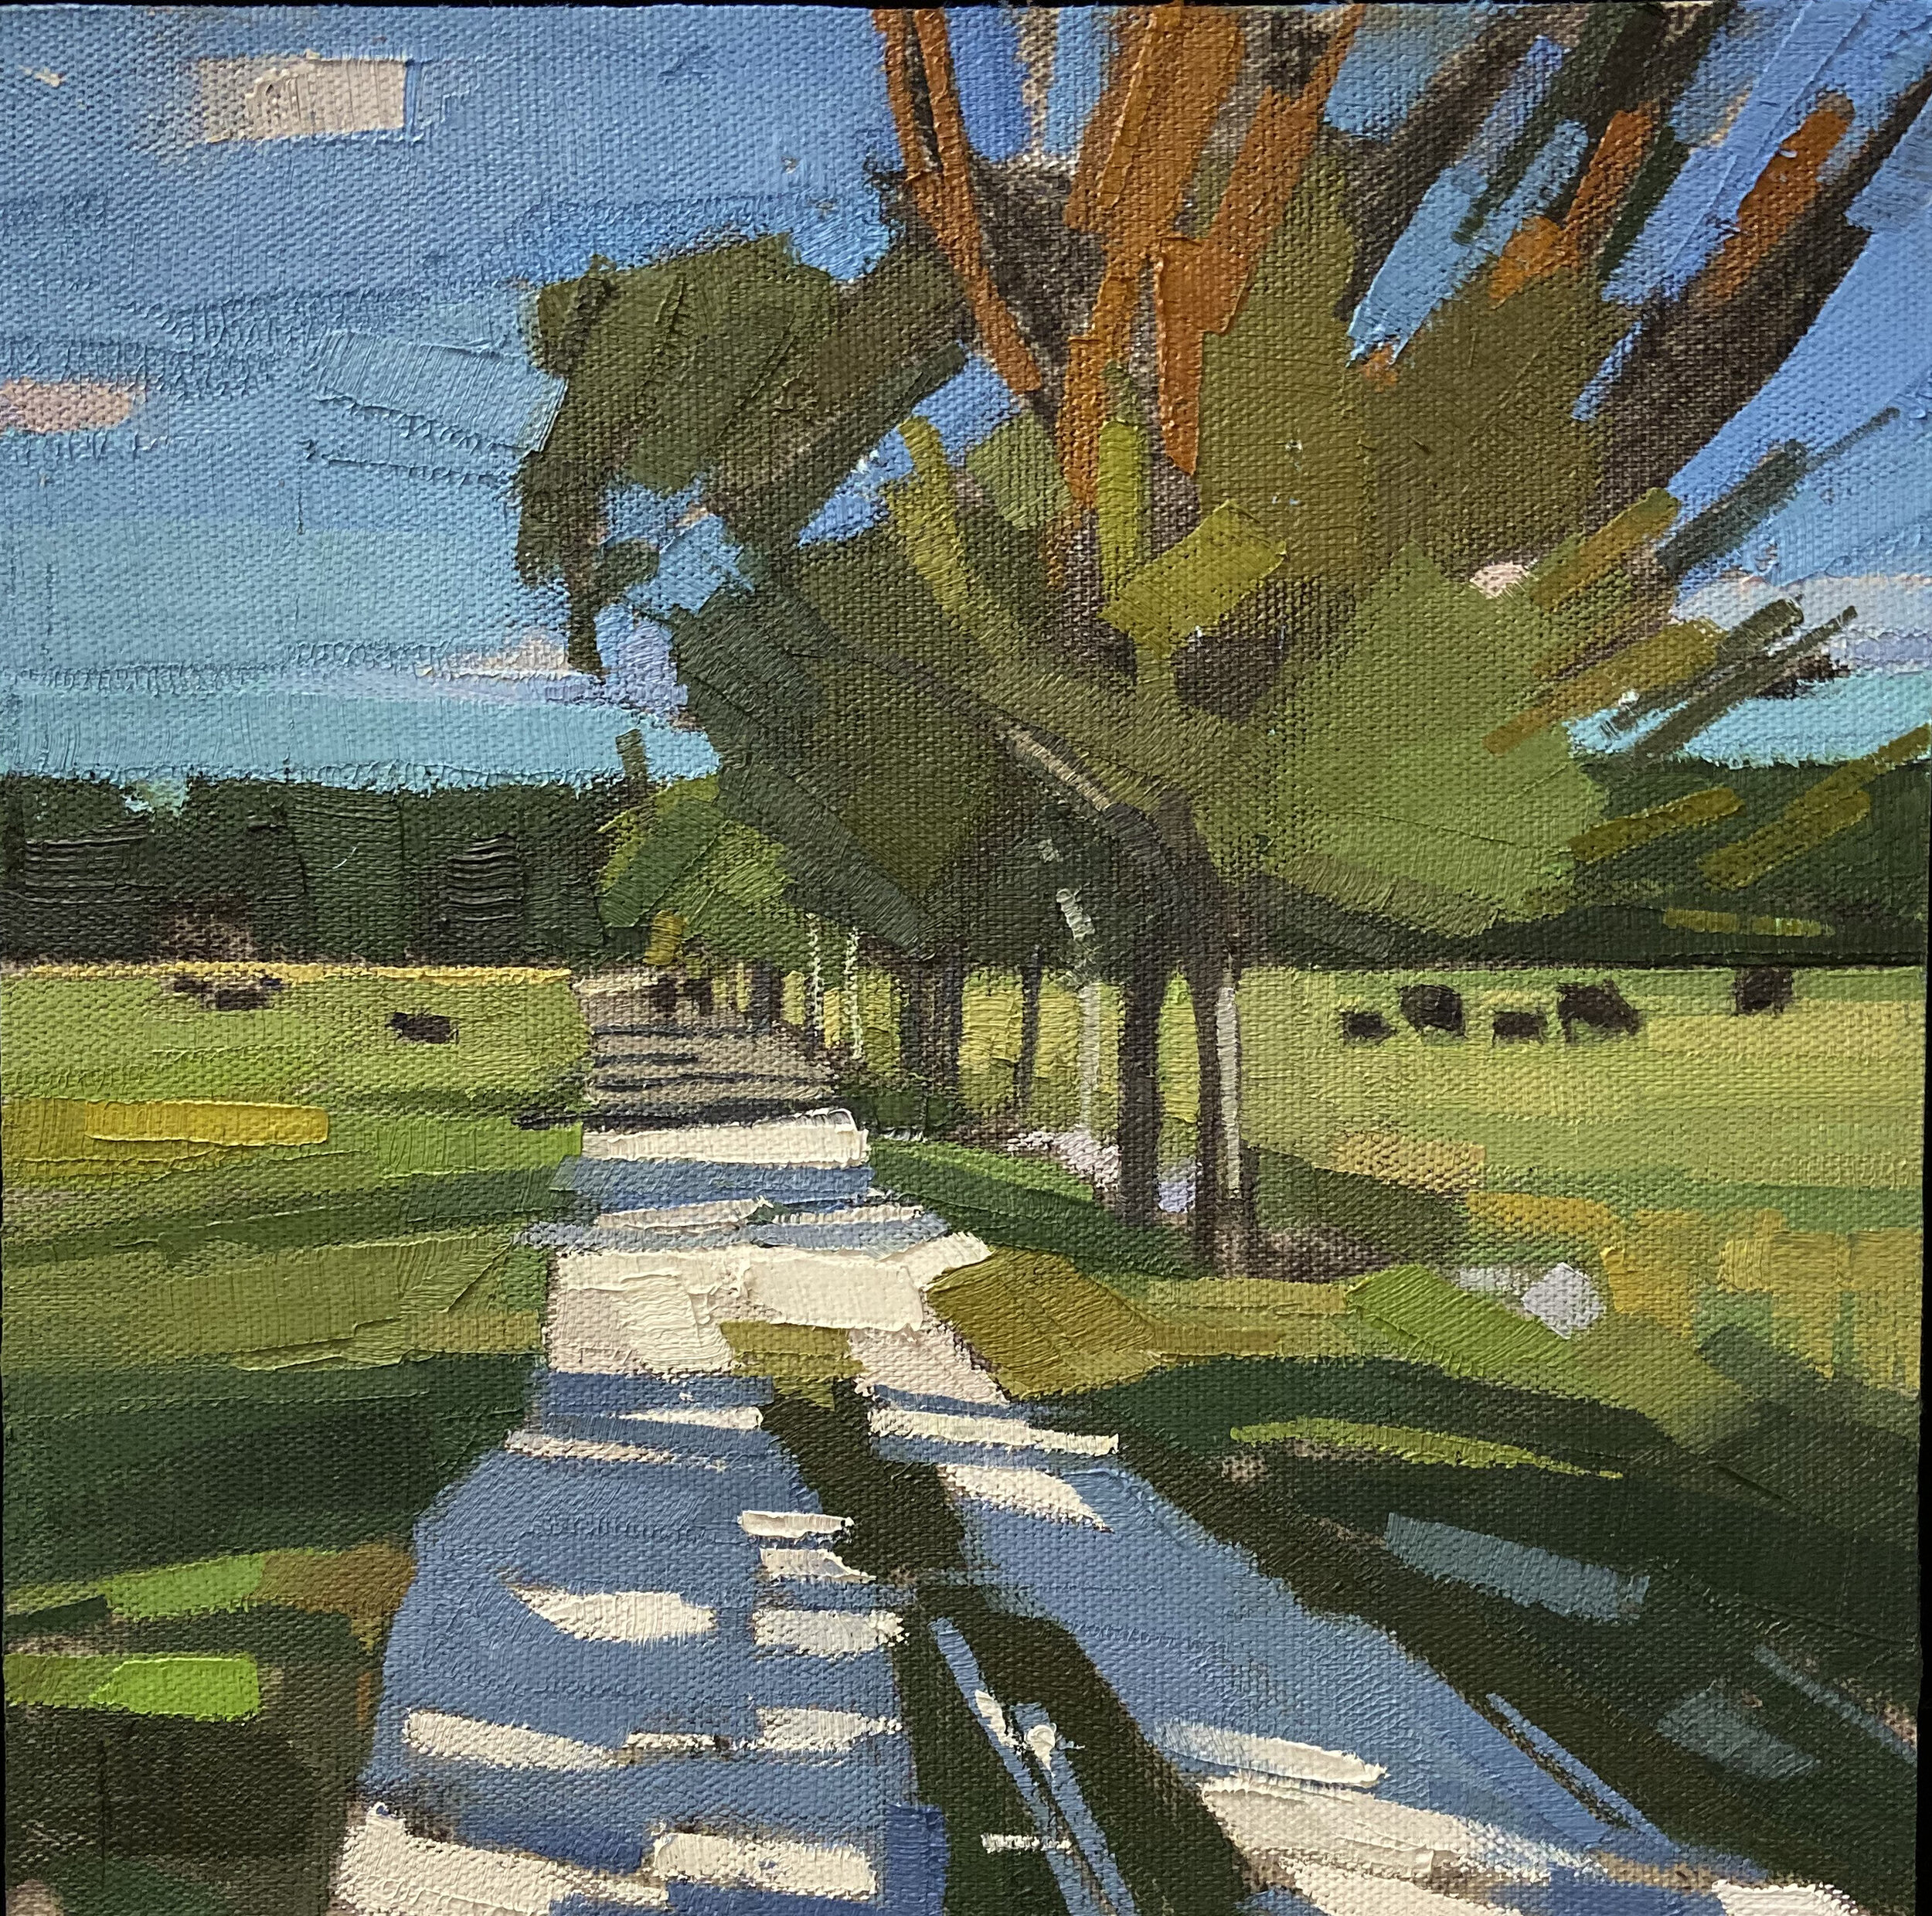   Fields in Summer  10 x 10 oil on cradled wood panel  sold 